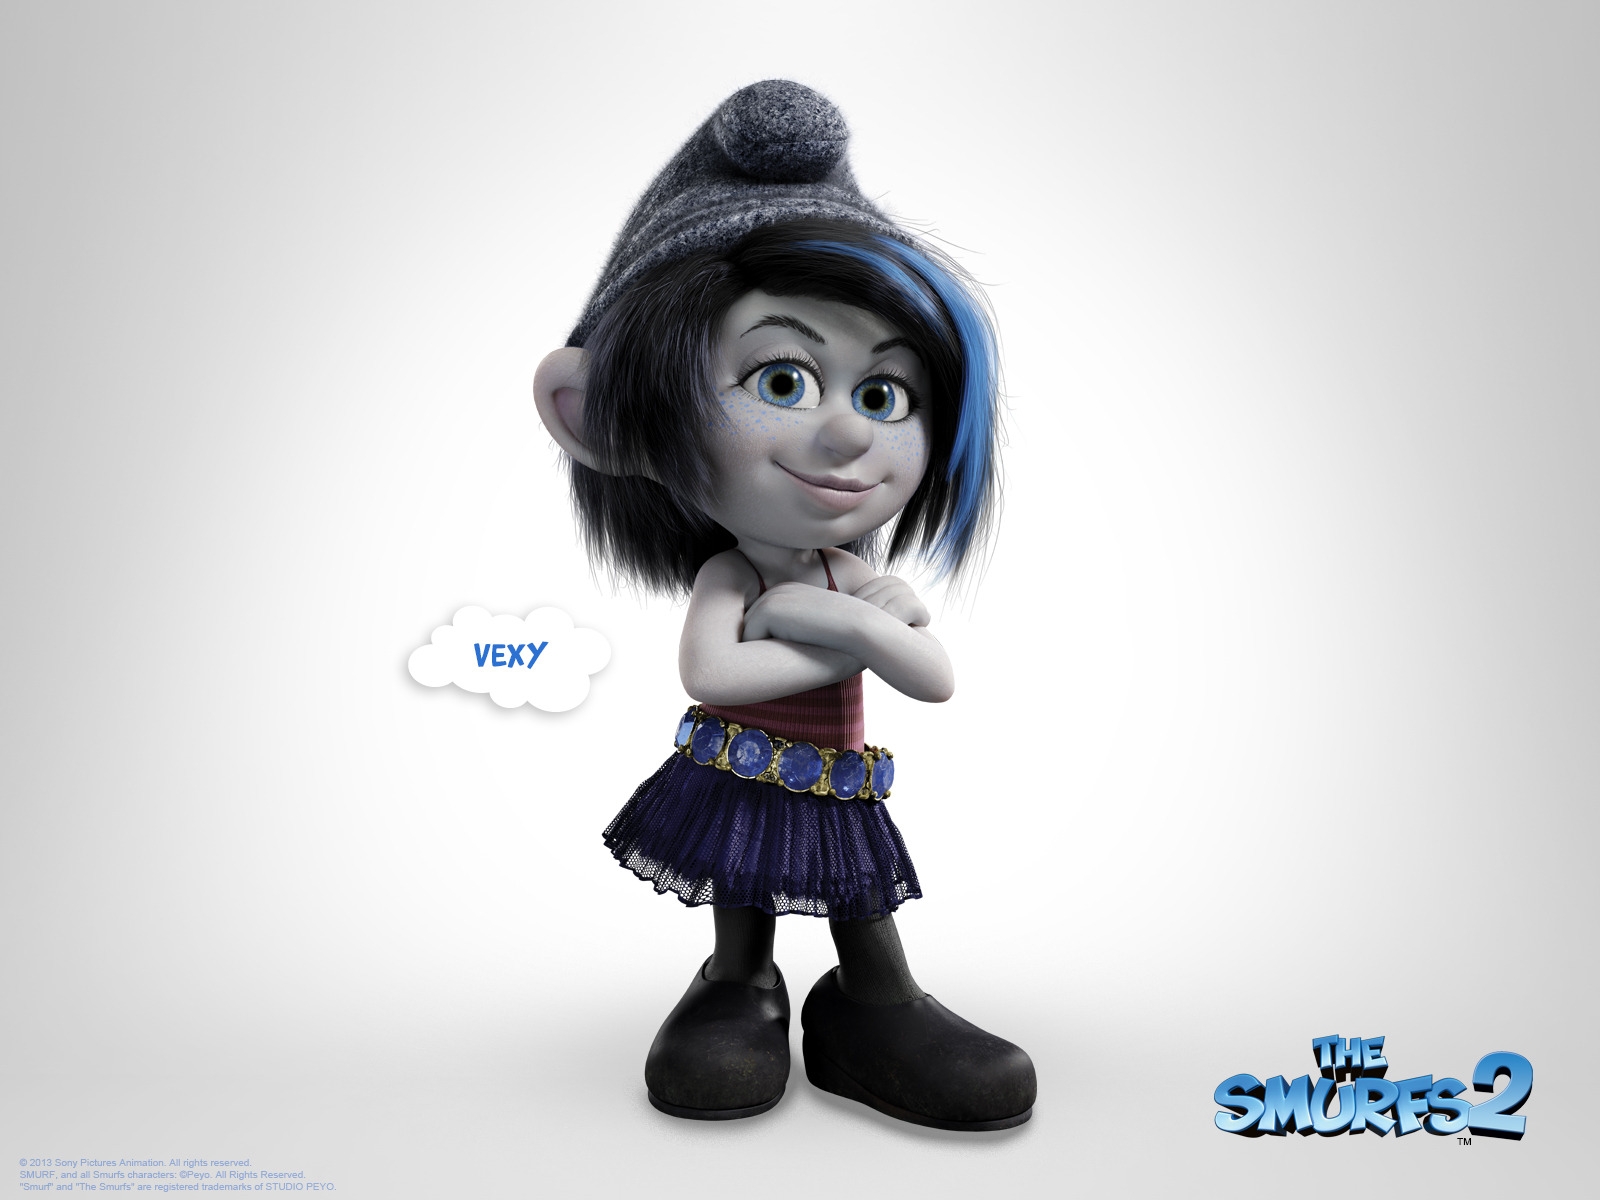 Vexy The Smurfs 2 for 1600 x 1200 resolution